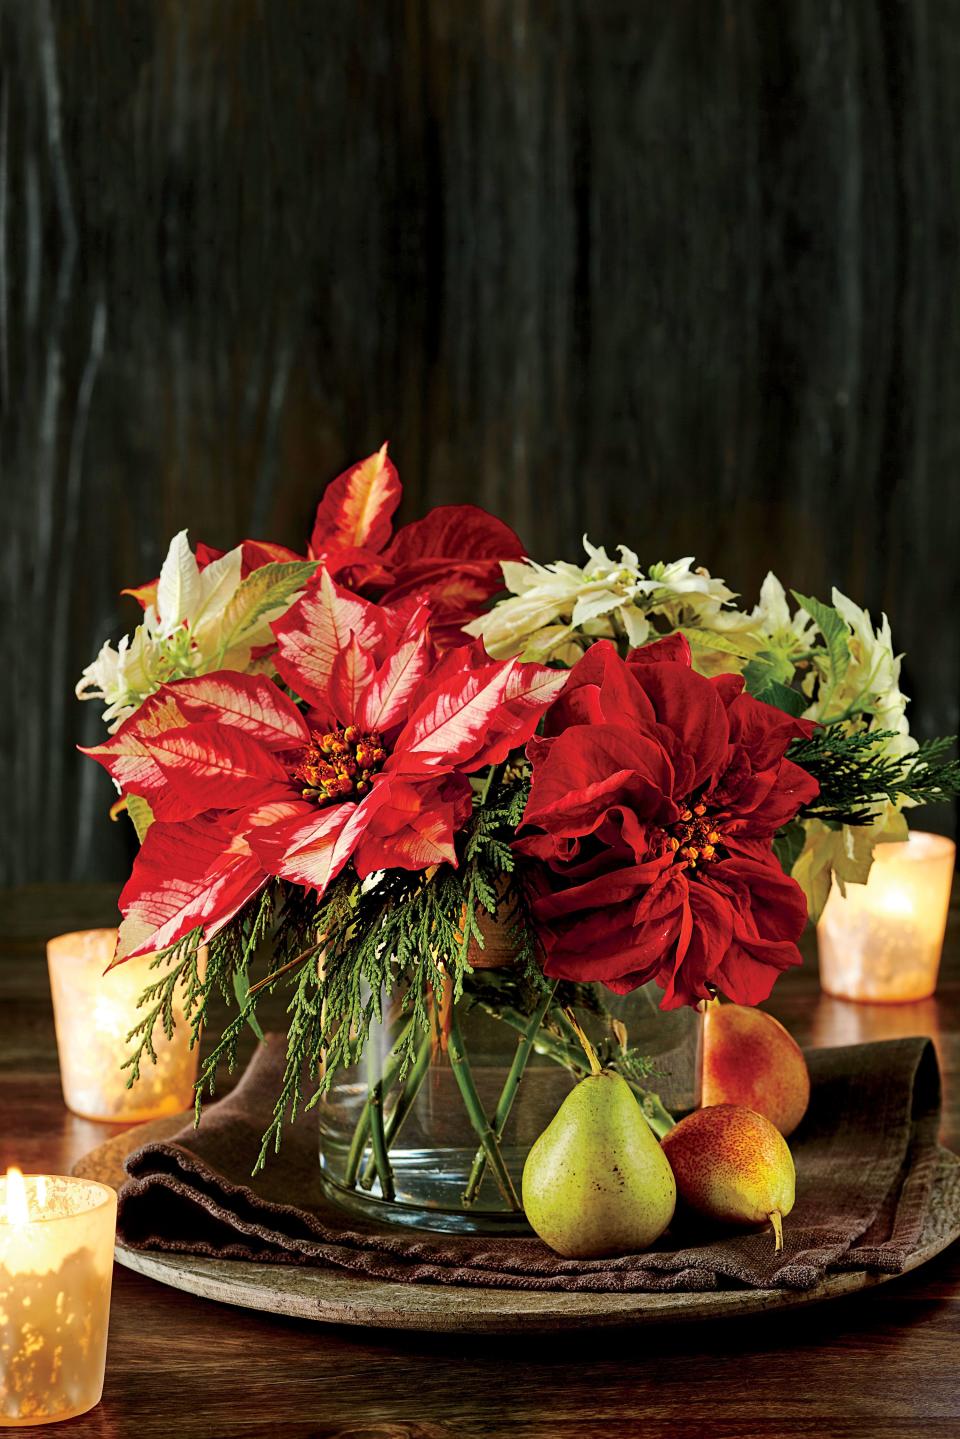 Spruced-Up Poinsettias